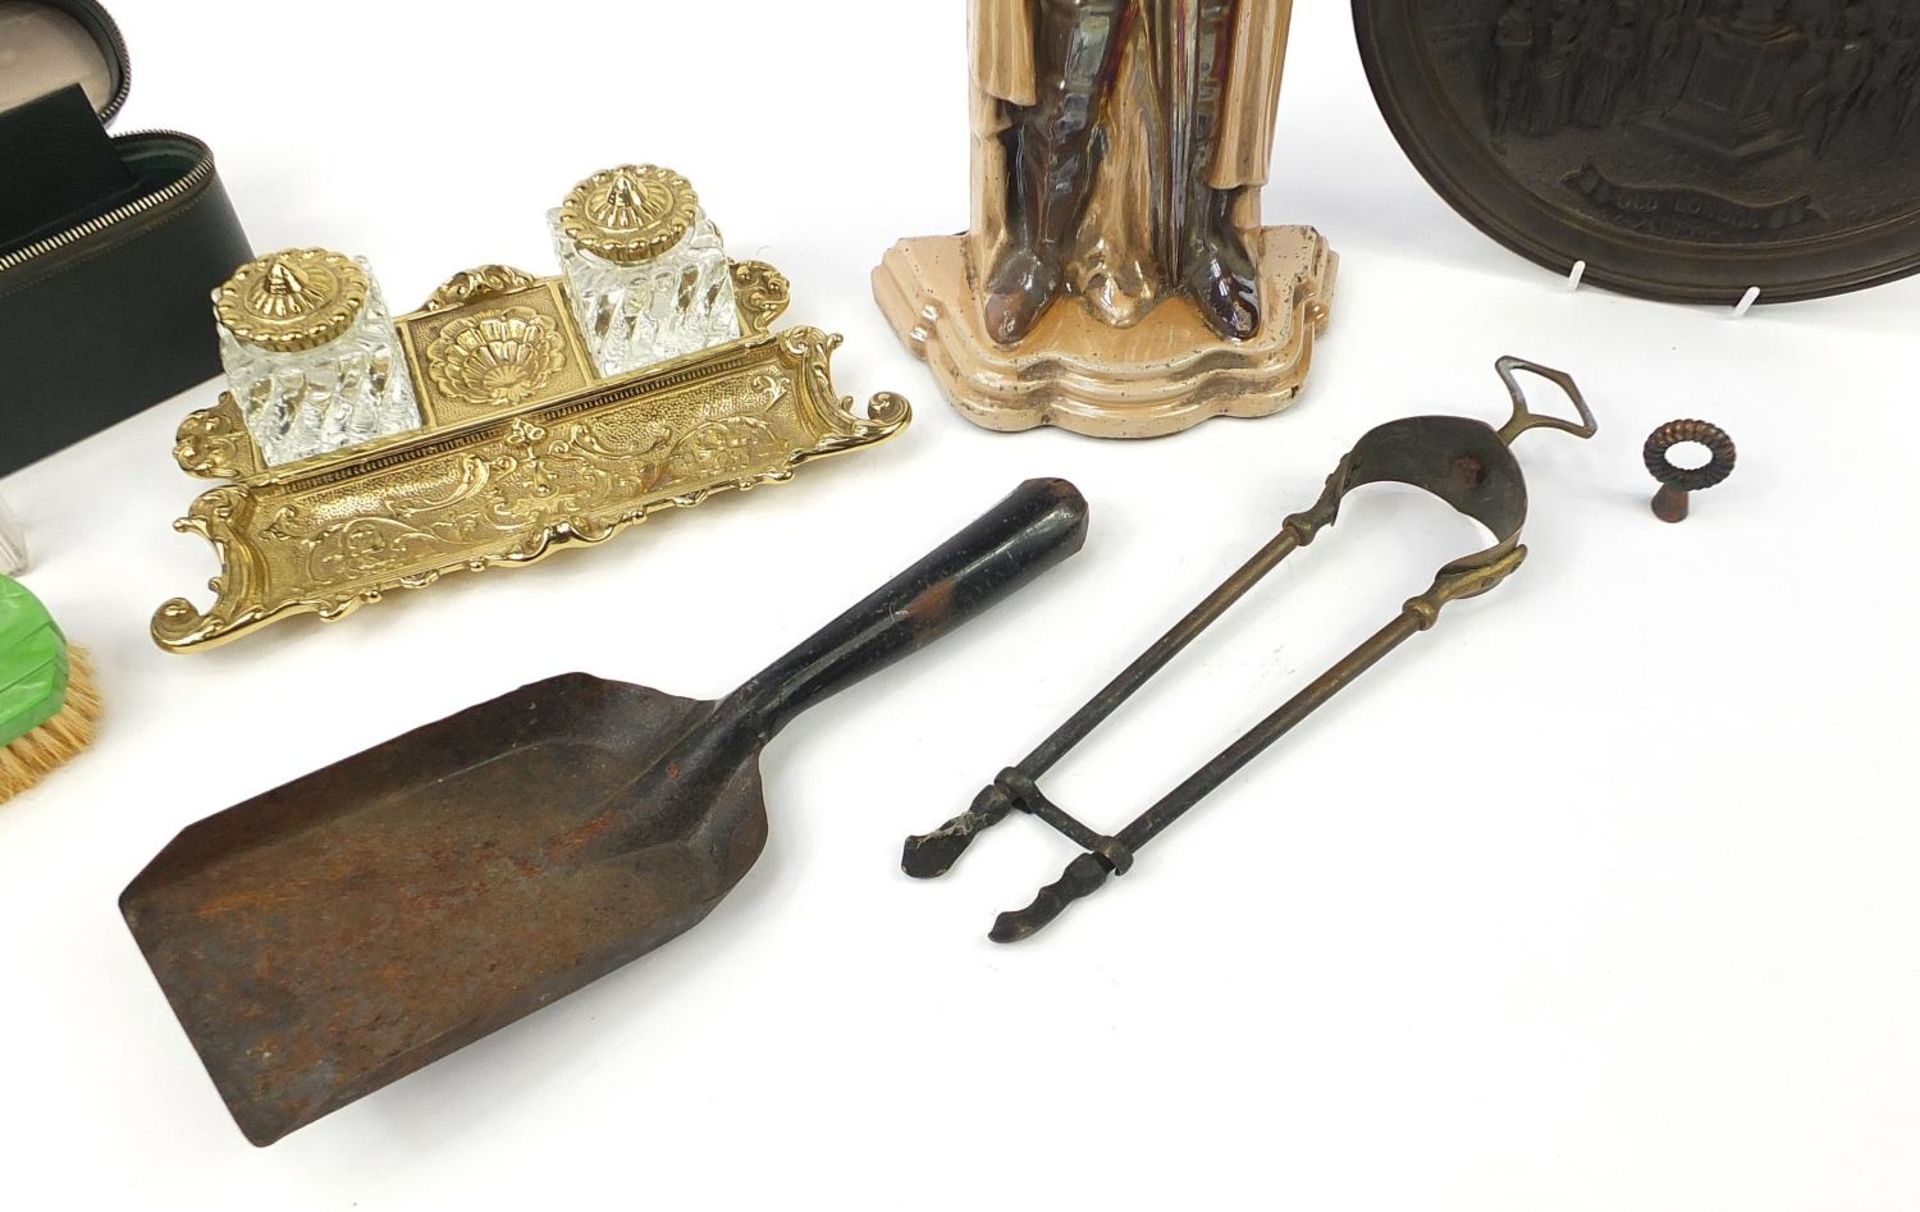 Sundry items including an ornate brass desk stand with glass inkwells and a knight fire companion - Image 5 of 5